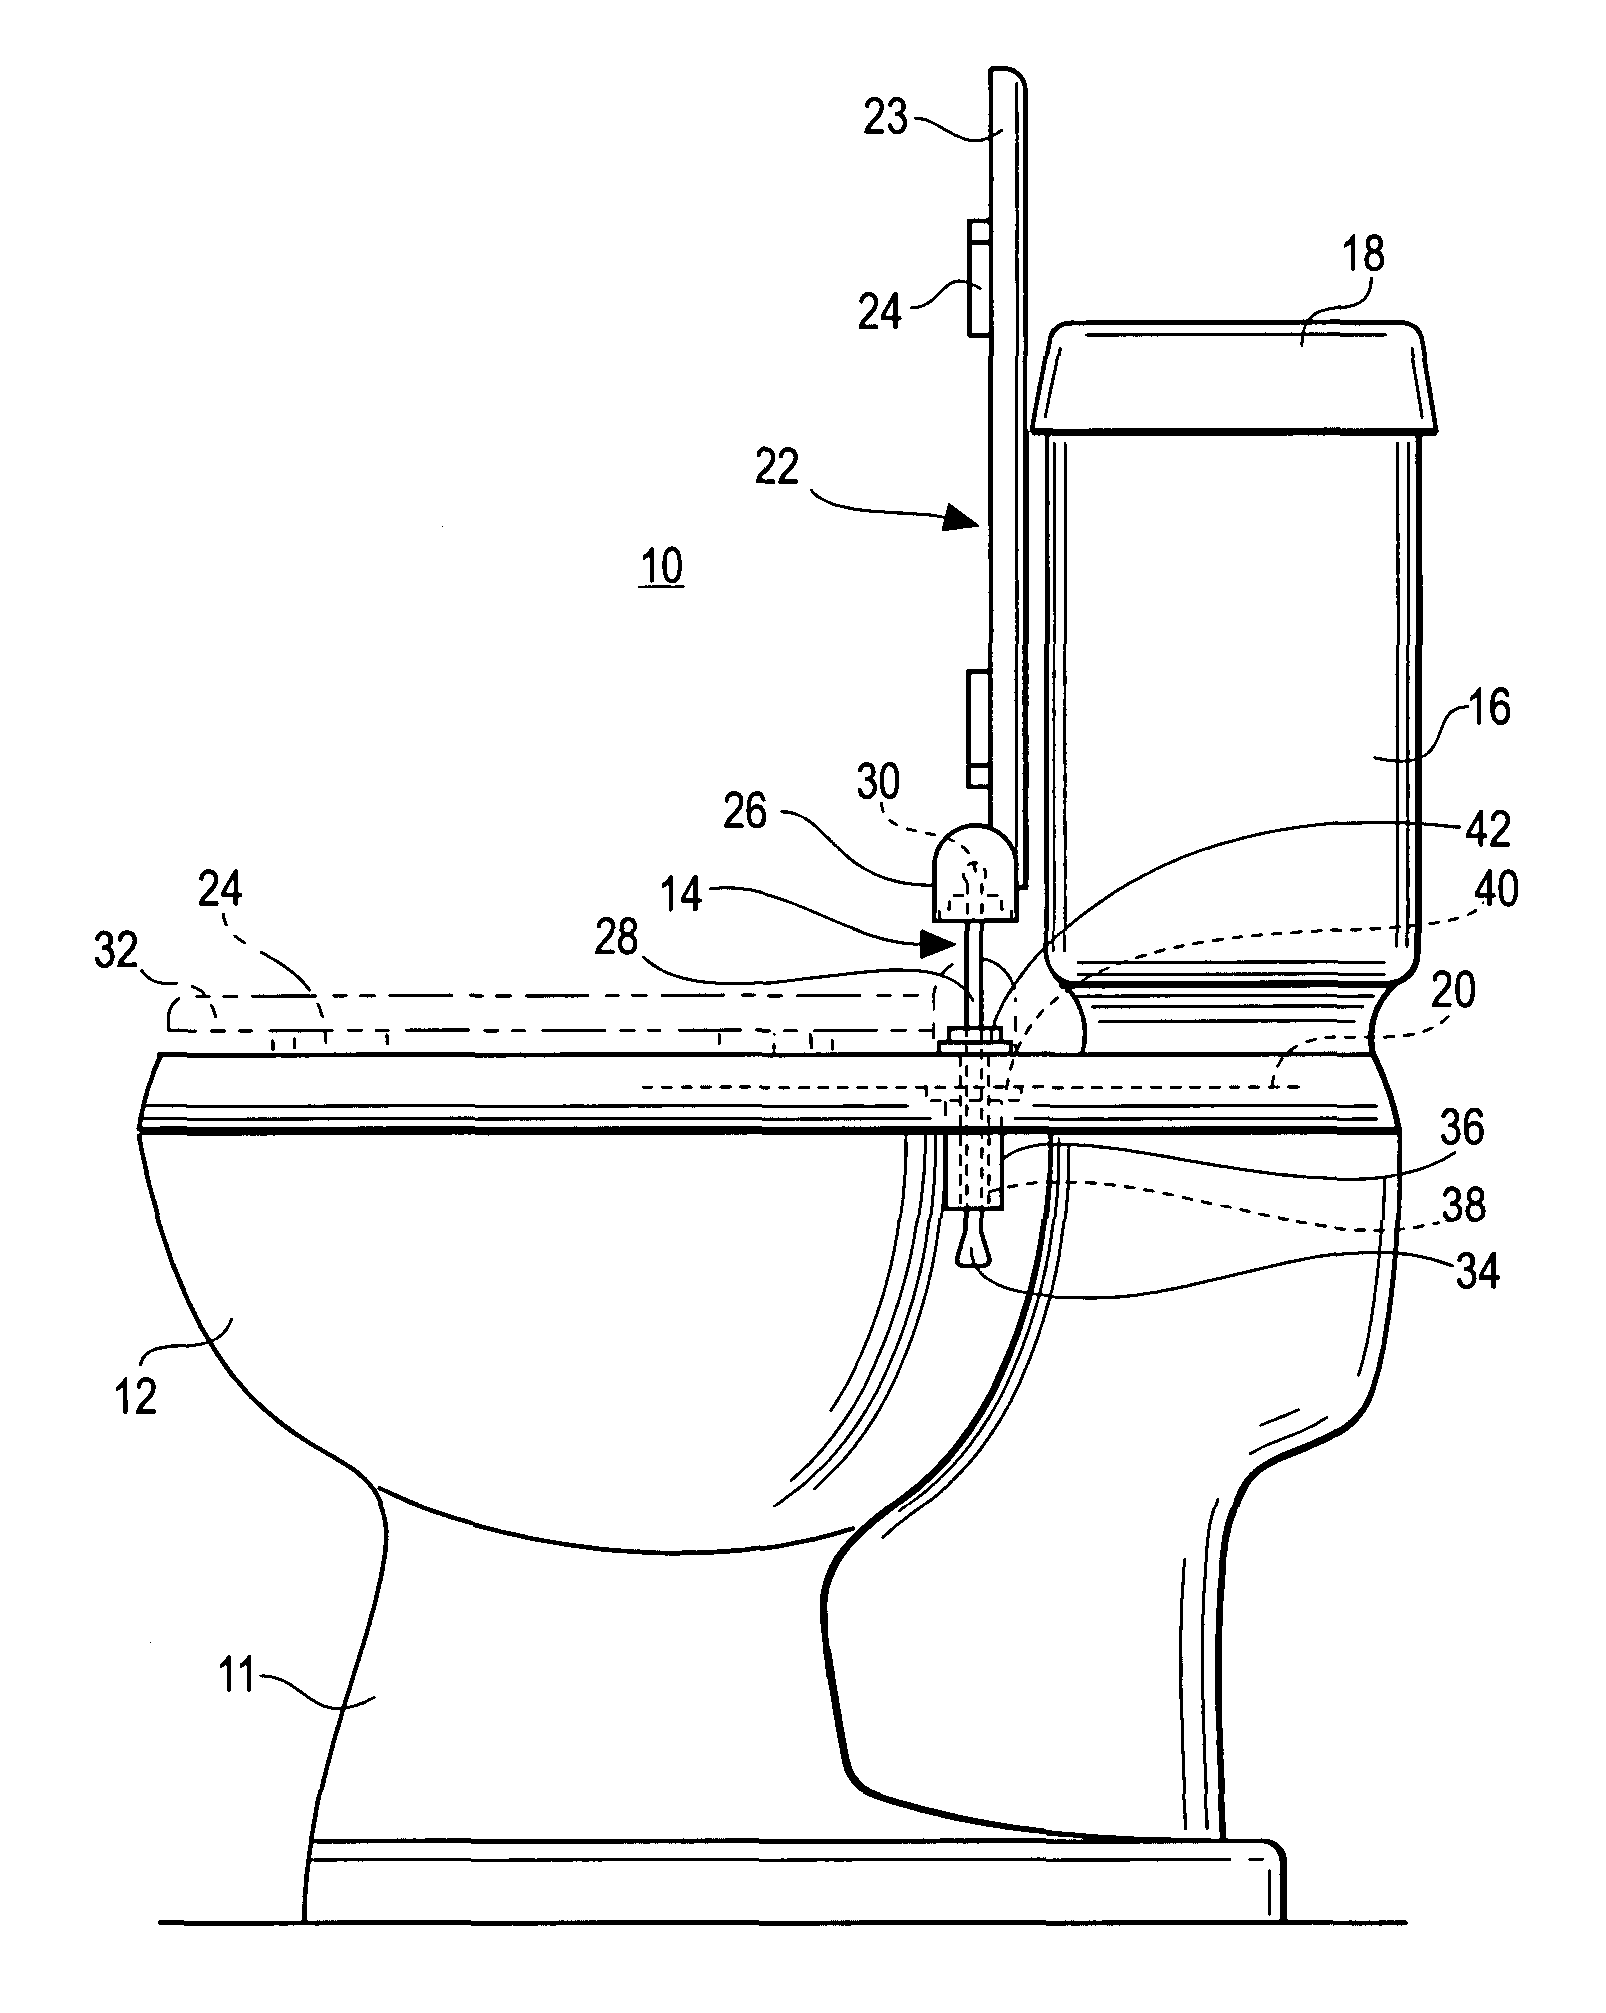 Toilet and toilet seat mounting system